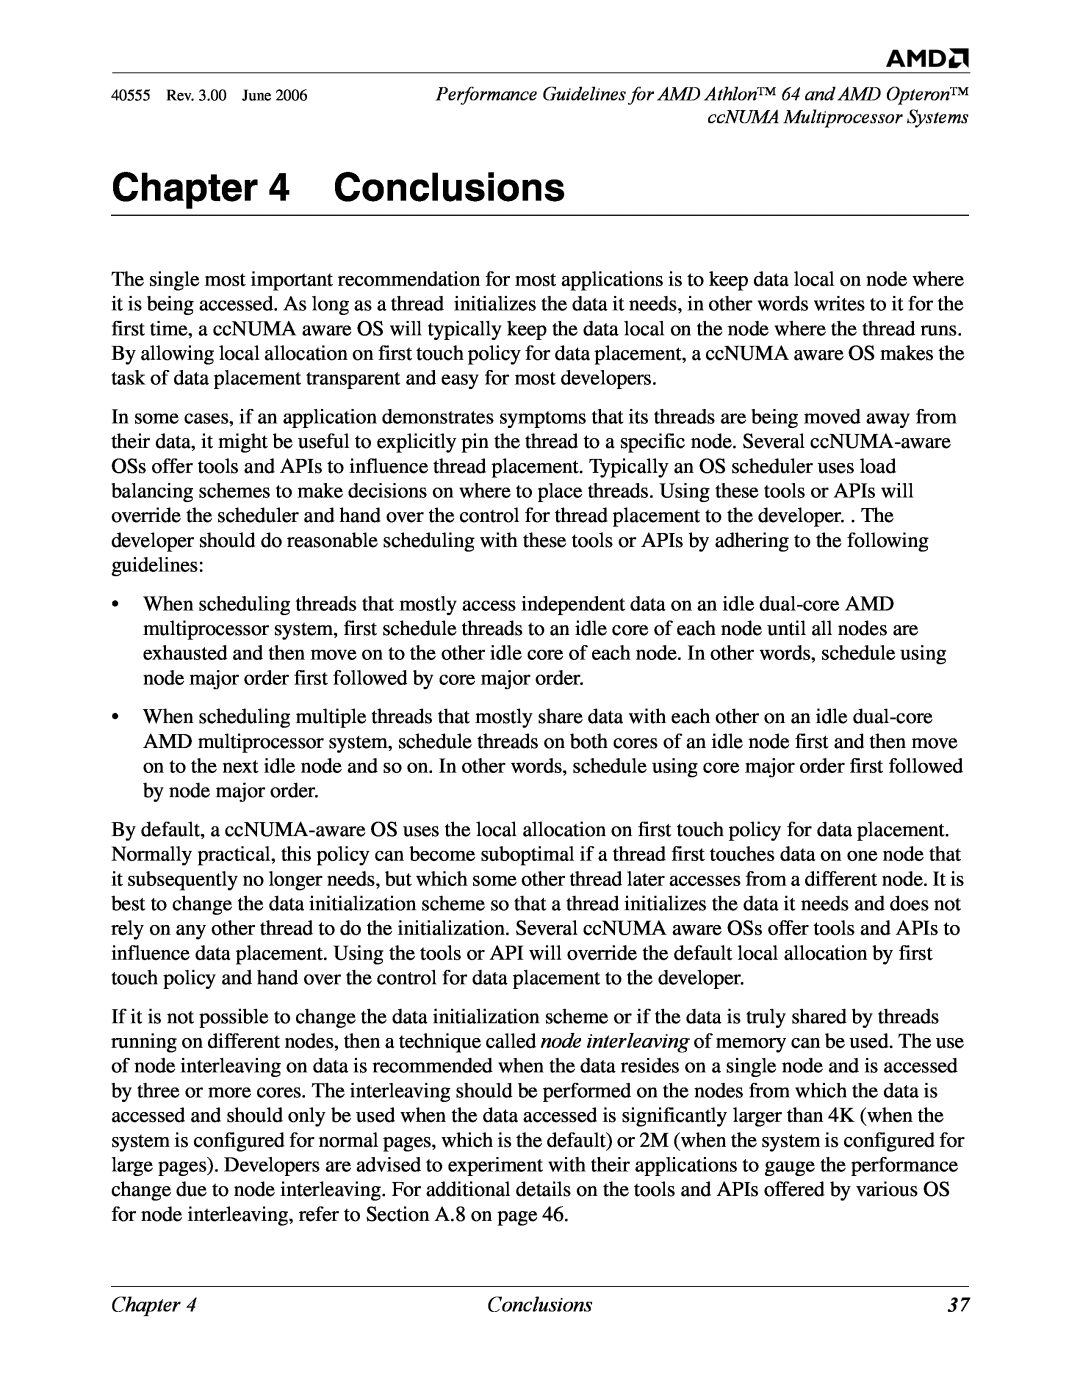 AMD 64 manual Conclusions, Chapter 